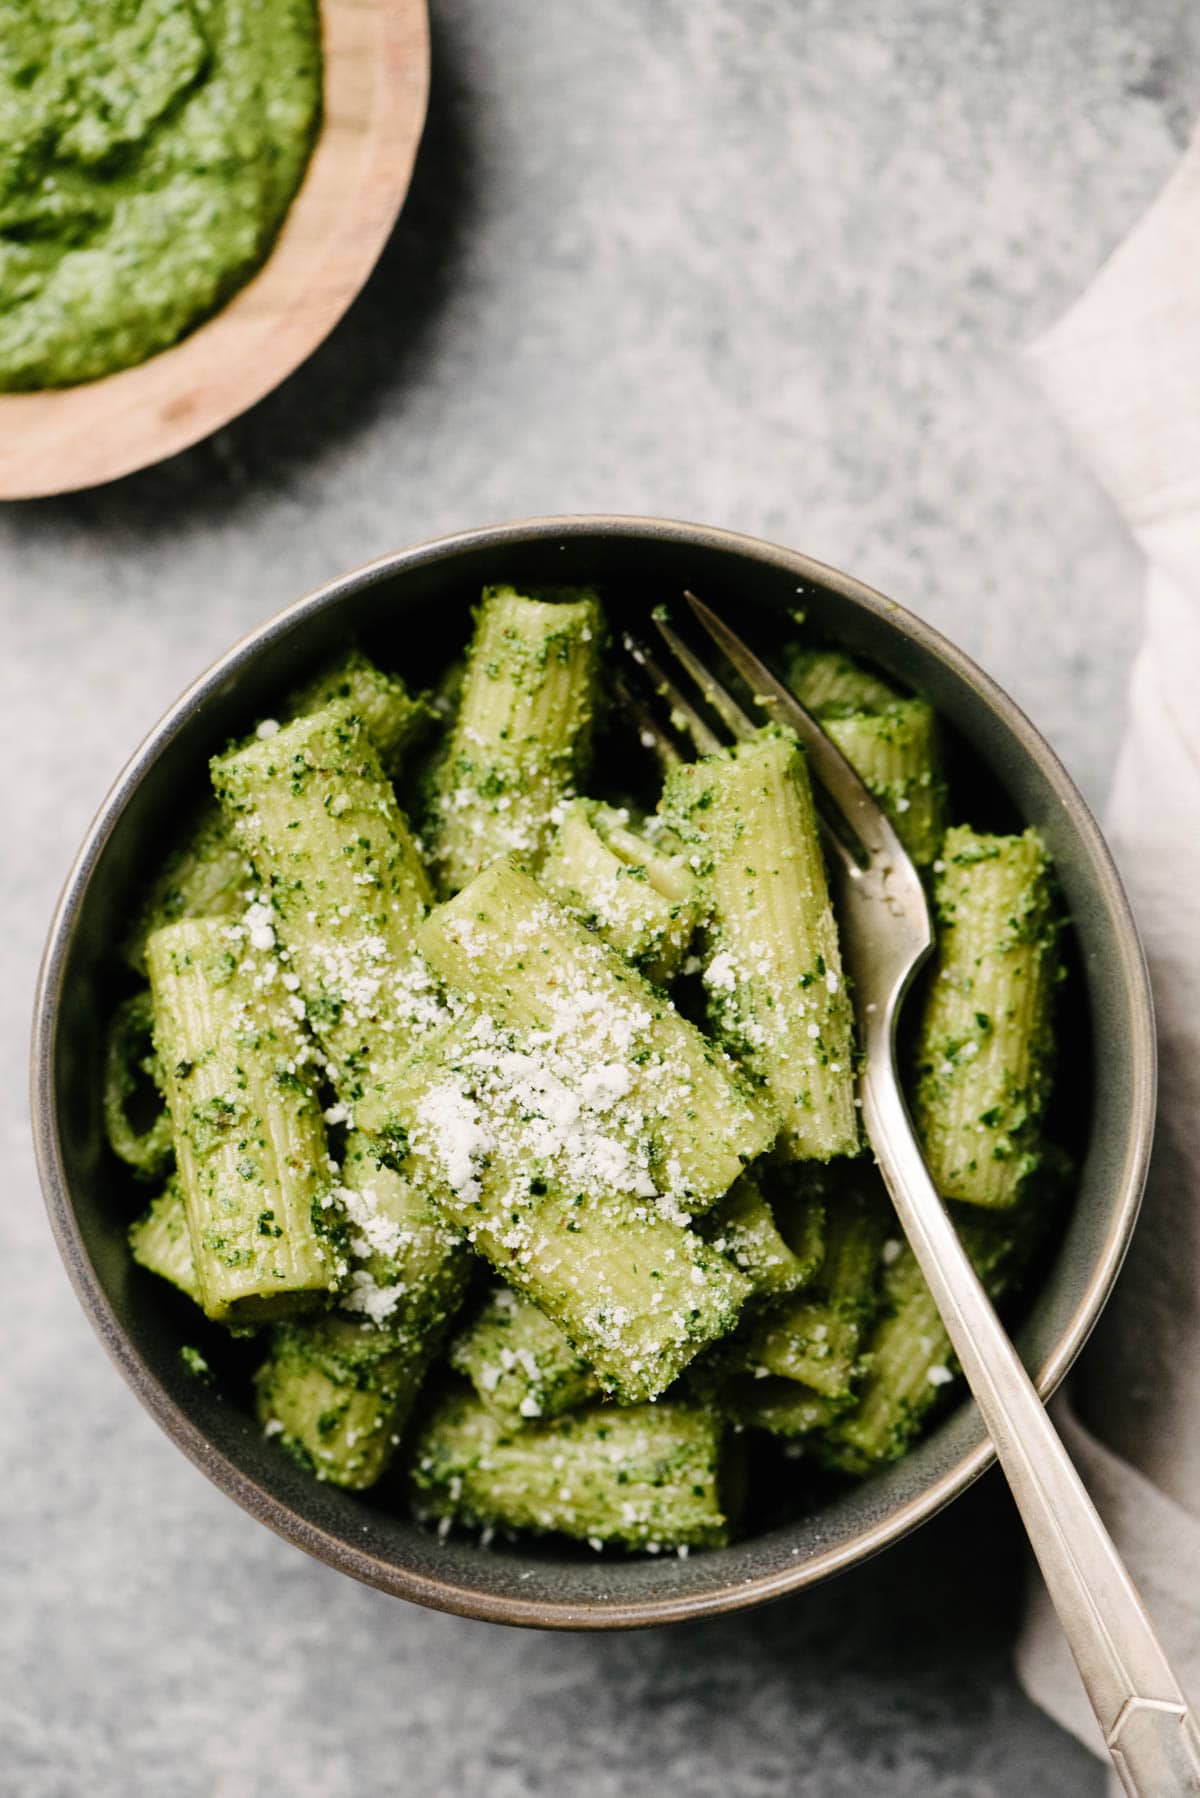 A bowl of rigatoni pasta tossed with spinach pesto on a concrete background with a linen napkin and small bowl of pesto to the side.